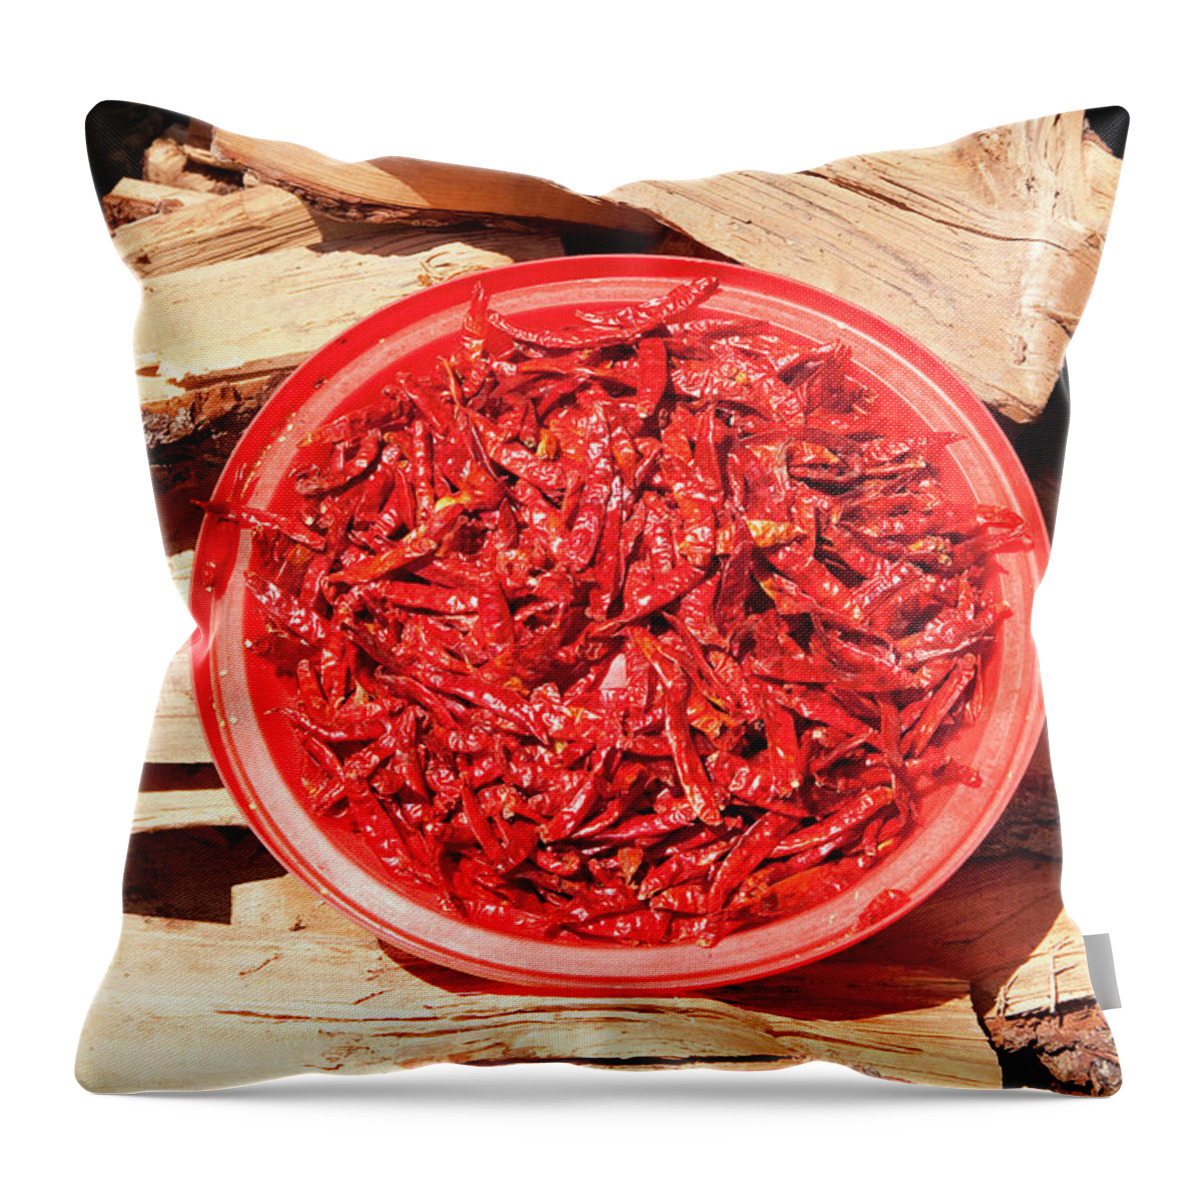 Ip_10281288 Throw Pillow featuring the photograph Bowl Of Chilli From Bhutan by Lukas Larsson Jalag